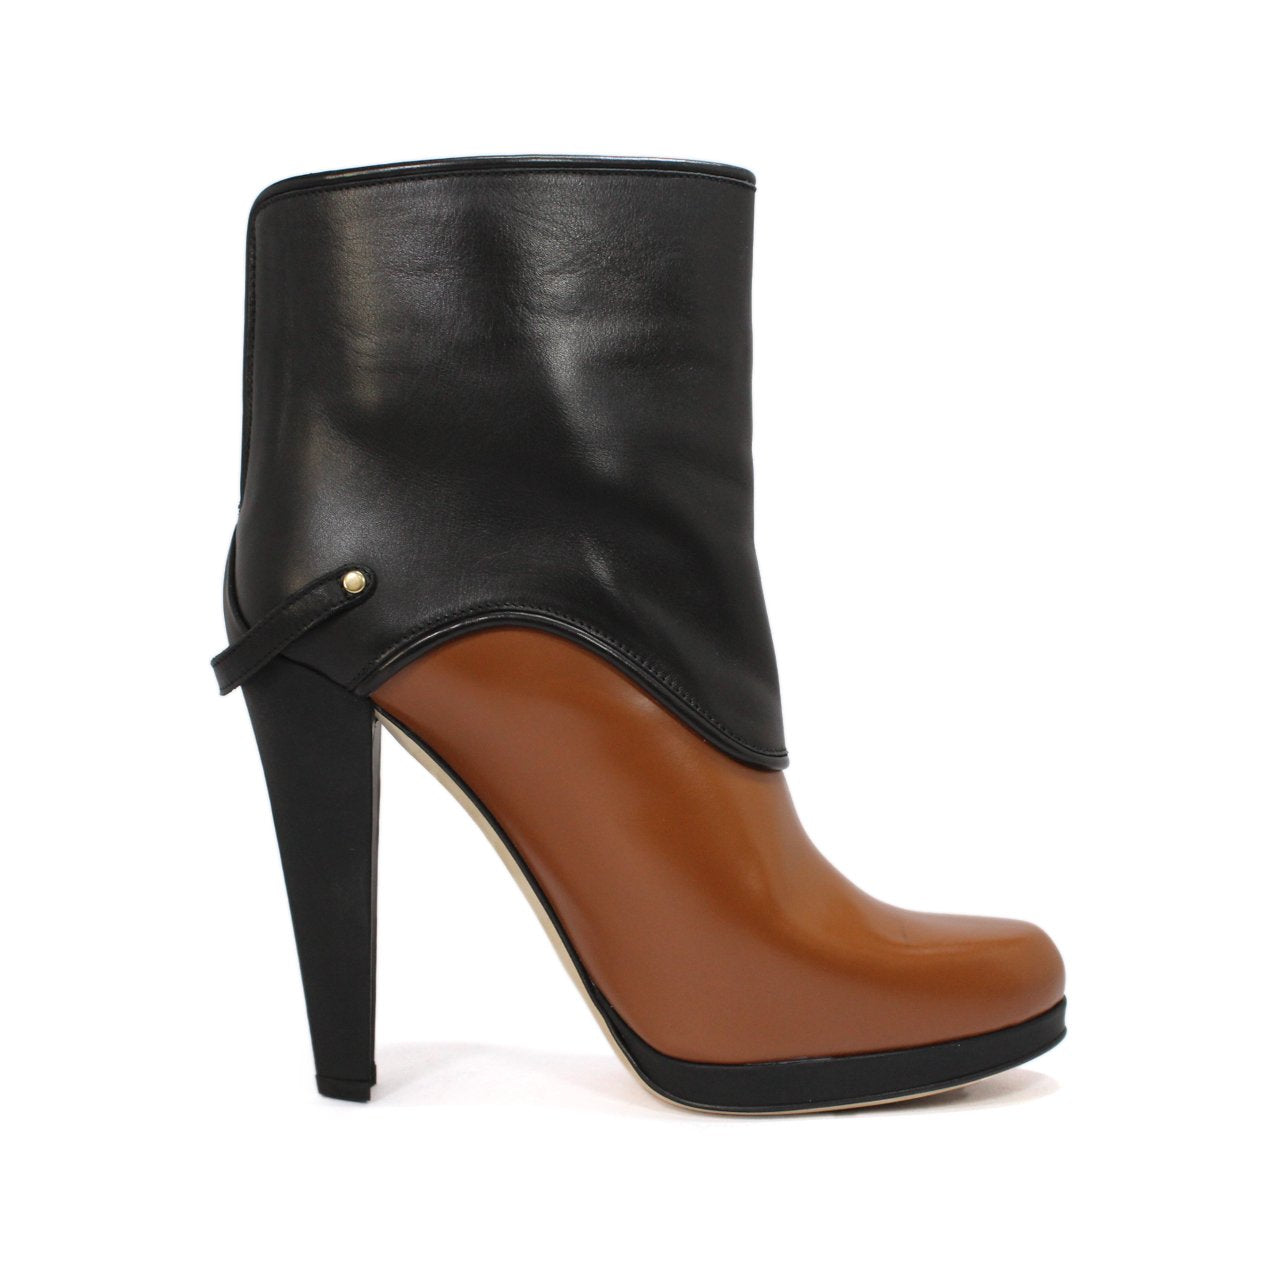 Bally Dienne Dual Color Buckle Strap Ankle Booties